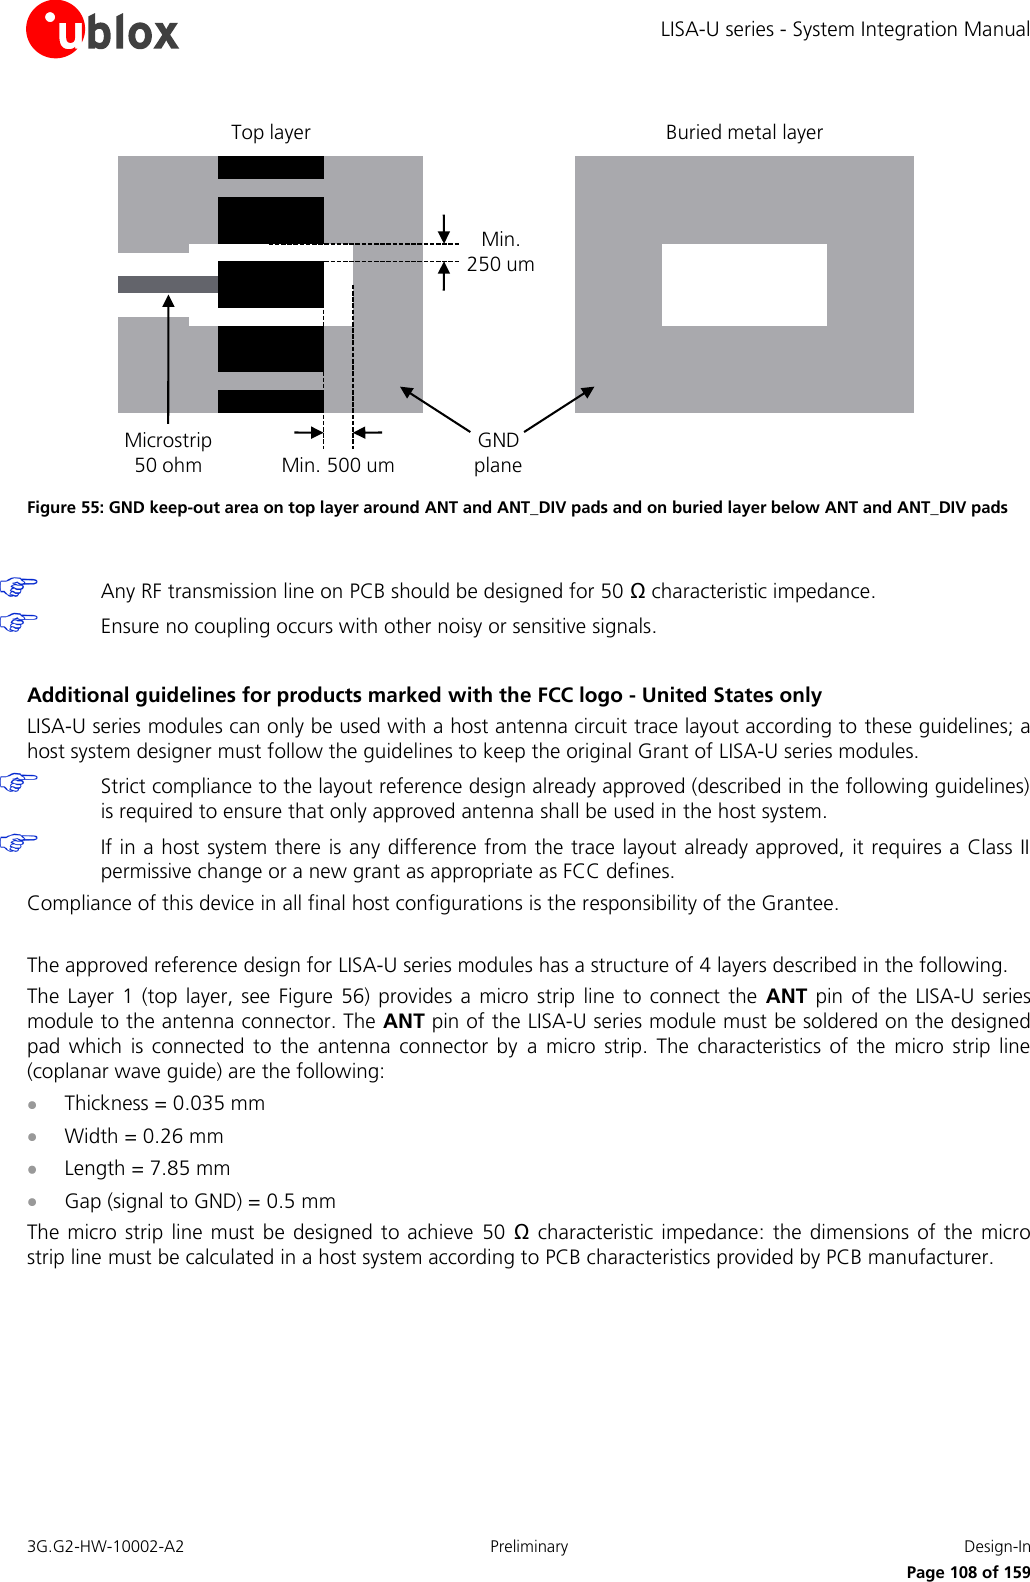 LISA-U series - System Integration Manual 3G.G2-HW-10002-A2  Preliminary  Design-In      Page 108 of 159 Min. 500 umMin. 250 umTop layer Buried metal layerGND planeMicrostrip50 ohm Figure 55: GND keep-out area on top layer around ANT and ANT_DIV pads and on buried layer below ANT and ANT_DIV pads   Any RF transmission line on PCB should be designed for 50 Ω characteristic impedance.  Ensure no coupling occurs with other noisy or sensitive signals.  Additional guidelines for products marked with the FCC logo - United States only LISA-U series modules can only be used with a host antenna circuit trace layout according to these guidelines; a host system designer must follow the guidelines to keep the original Grant of LISA-U series modules.  Strict compliance to the layout reference design already approved (described in the following guidelines) is required to ensure that only approved antenna shall be used in the host system.  If in a host system there is any difference from the trace layout already approved, it requires a Class II permissive change or a new grant as appropriate as FCC defines. Compliance of this device in all final host configurations is the responsibility of the Grantee.  The approved reference design for LISA-U series modules has a structure of 4 layers described in the following. The  Layer 1  (top layer,  see Figure  56) provides  a micro  strip line  to connect  the  ANT pin  of the  LISA-U series module to the antenna connector. The ANT pin of the LISA-U series module must be soldered on the designed pad  which  is connected  to  the  antenna  connector  by  a  micro  strip.  The  characteristics  of the  micro  strip  line (coplanar wave guide) are the following:  Thickness = 0.035 mm  Width = 0.26 mm  Length = 7.85 mm  Gap (signal to GND) = 0.5 mm The micro strip line must  be designed to achieve  50  Ω characteristic impedance: the  dimensions  of  the micro strip line must be calculated in a host system according to PCB characteristics provided by PCB manufacturer. 